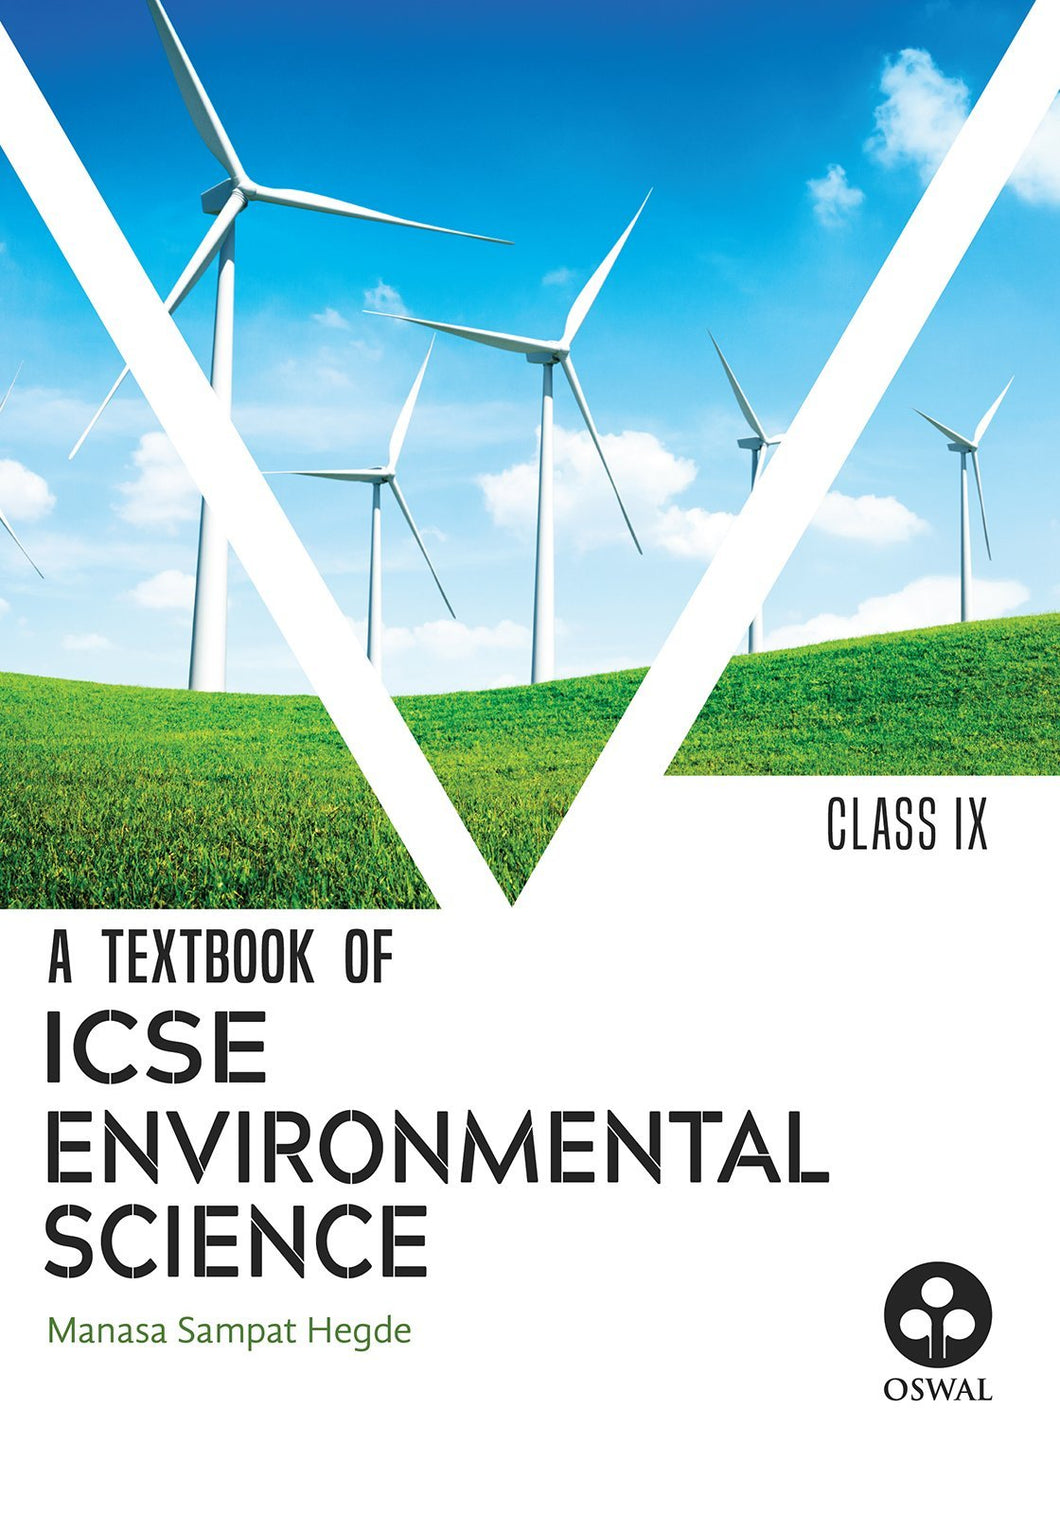 Oswal Environmental Science: Textbook for ICSE Class 9